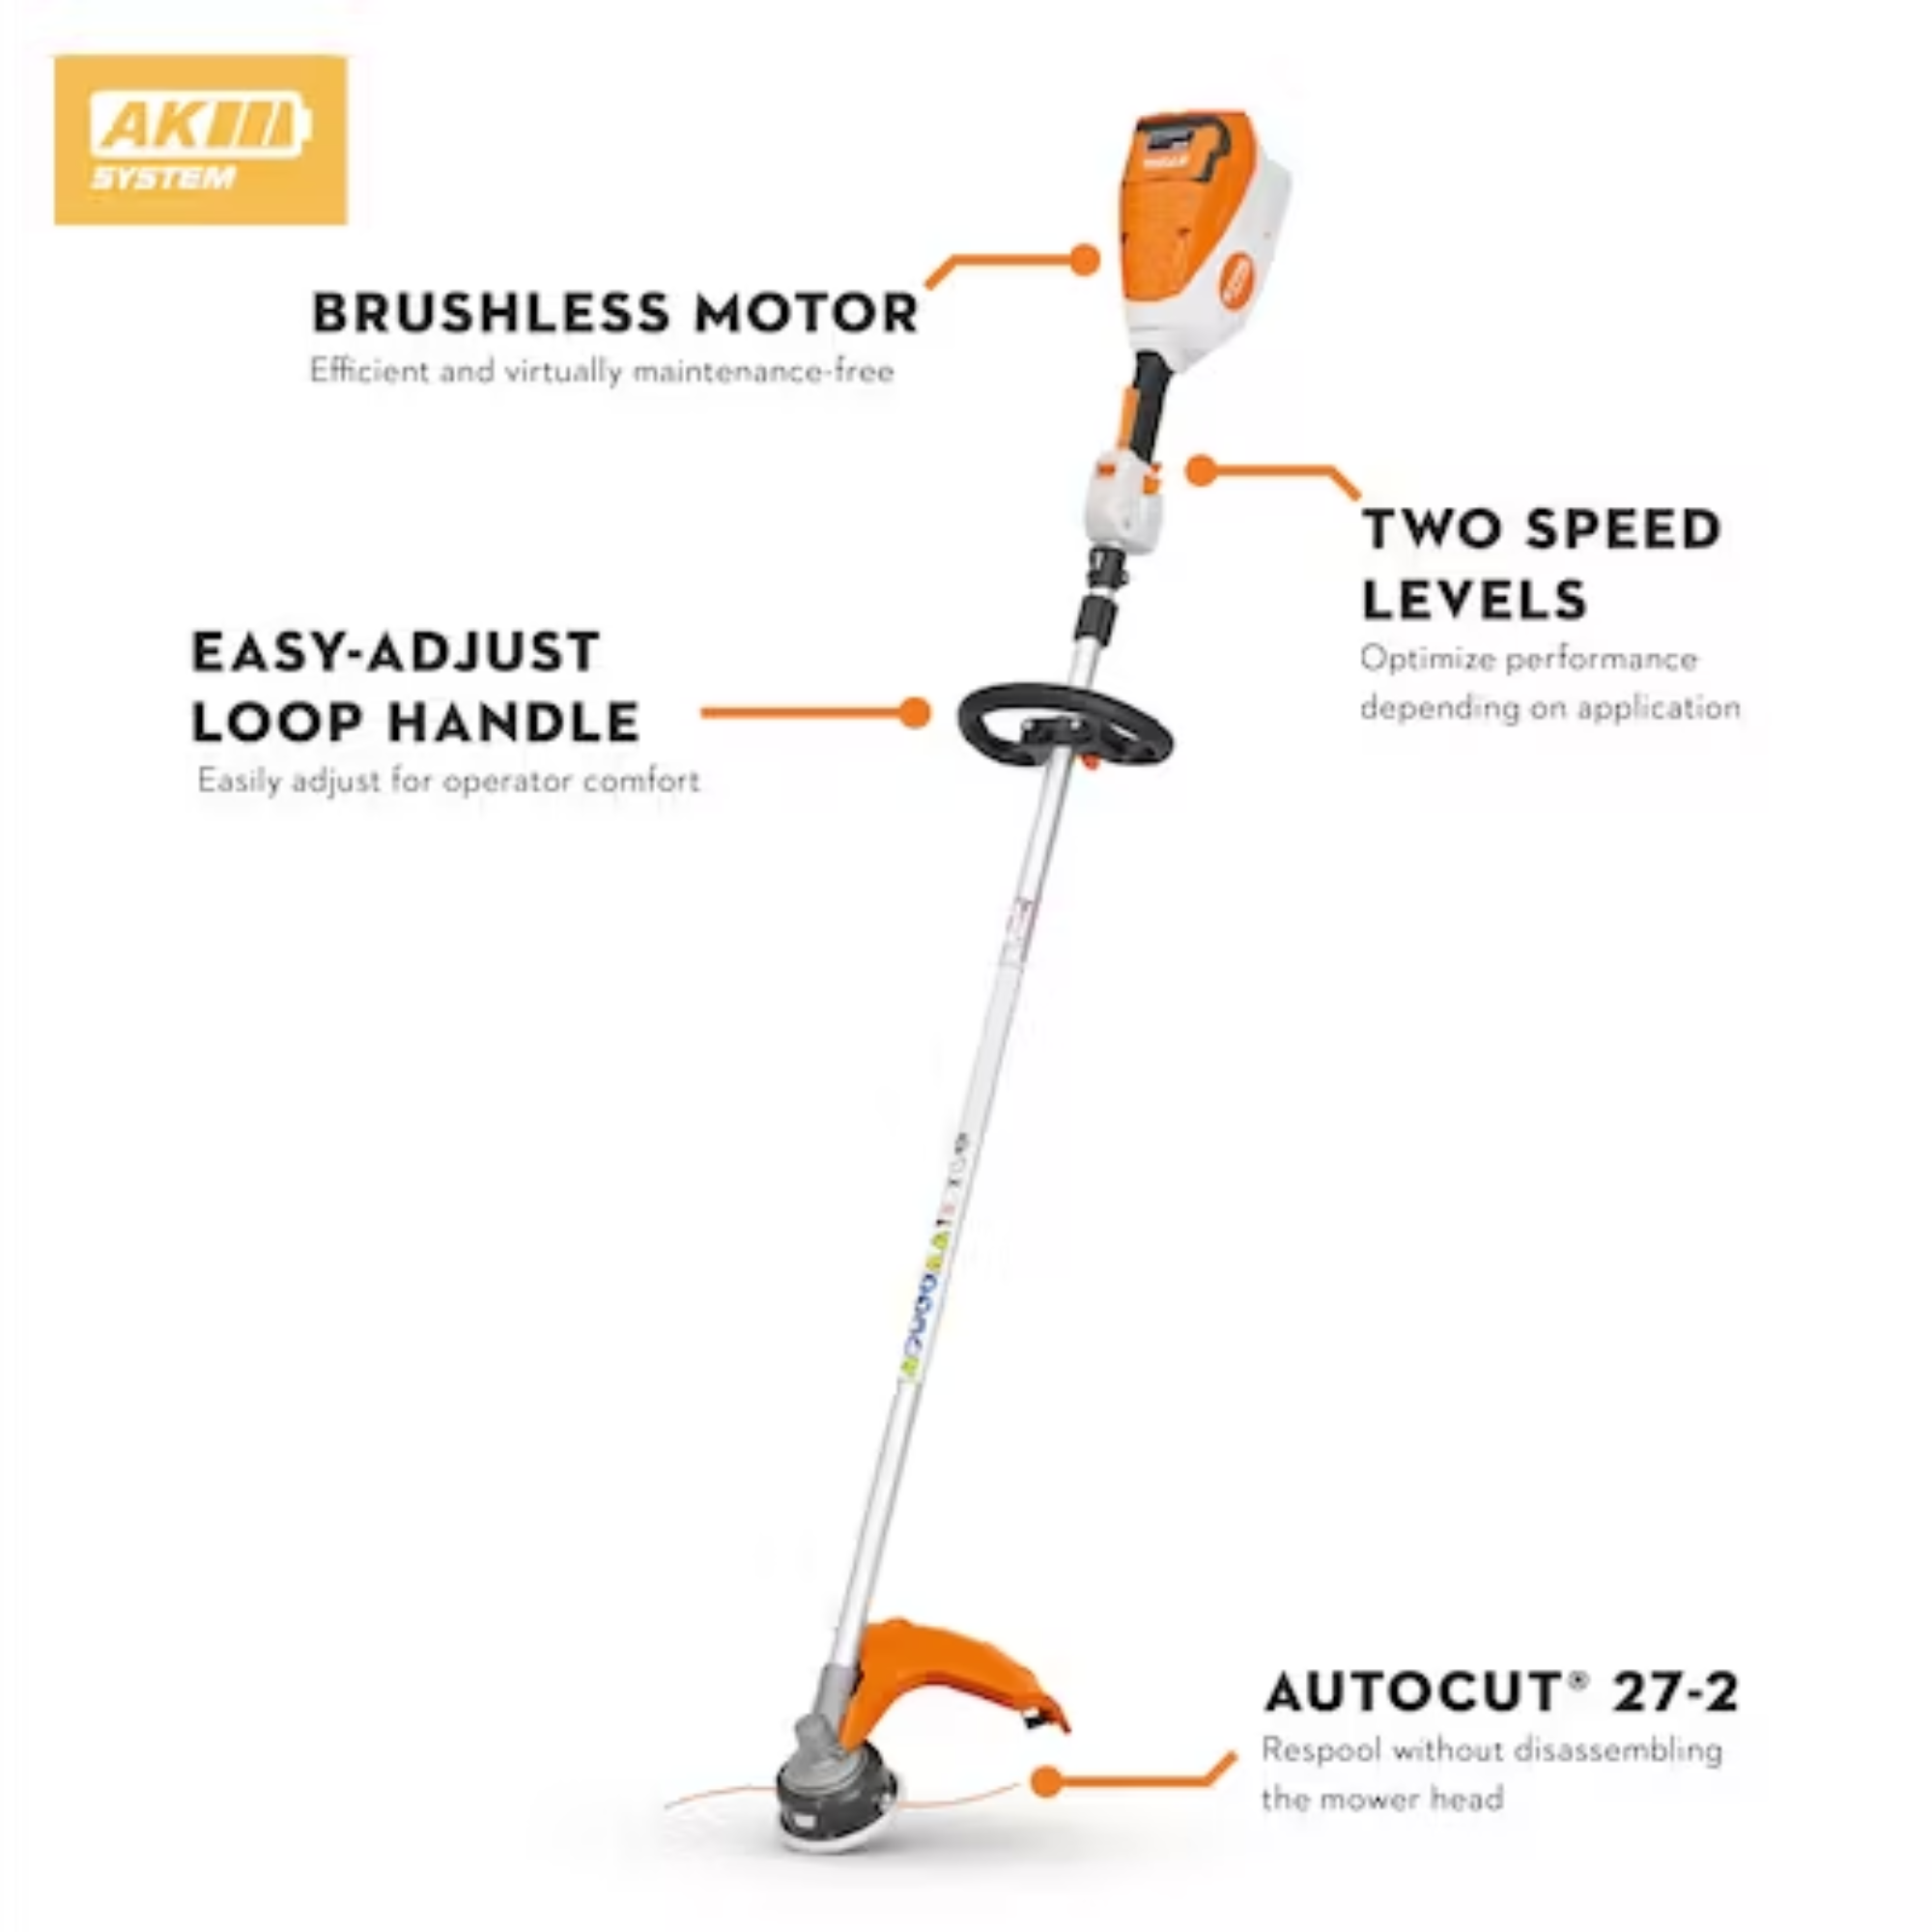 Stihl FSA 80 R Battery Powered String Trimmer | Tool Only